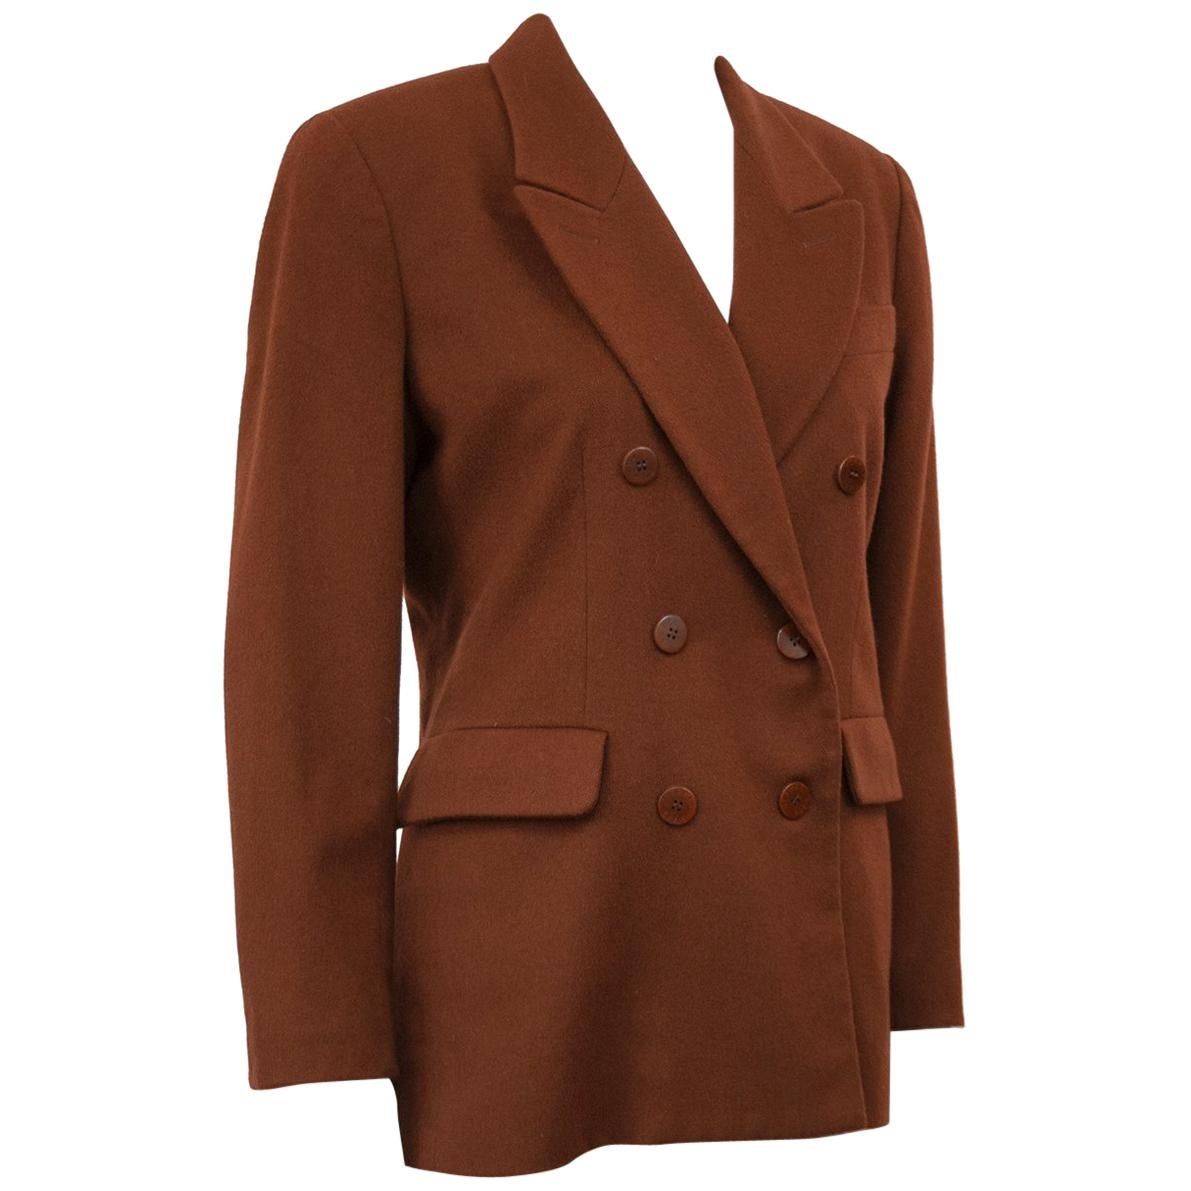 1990's Hermes Classic Cashmere Double Breasted Jacket in Rust